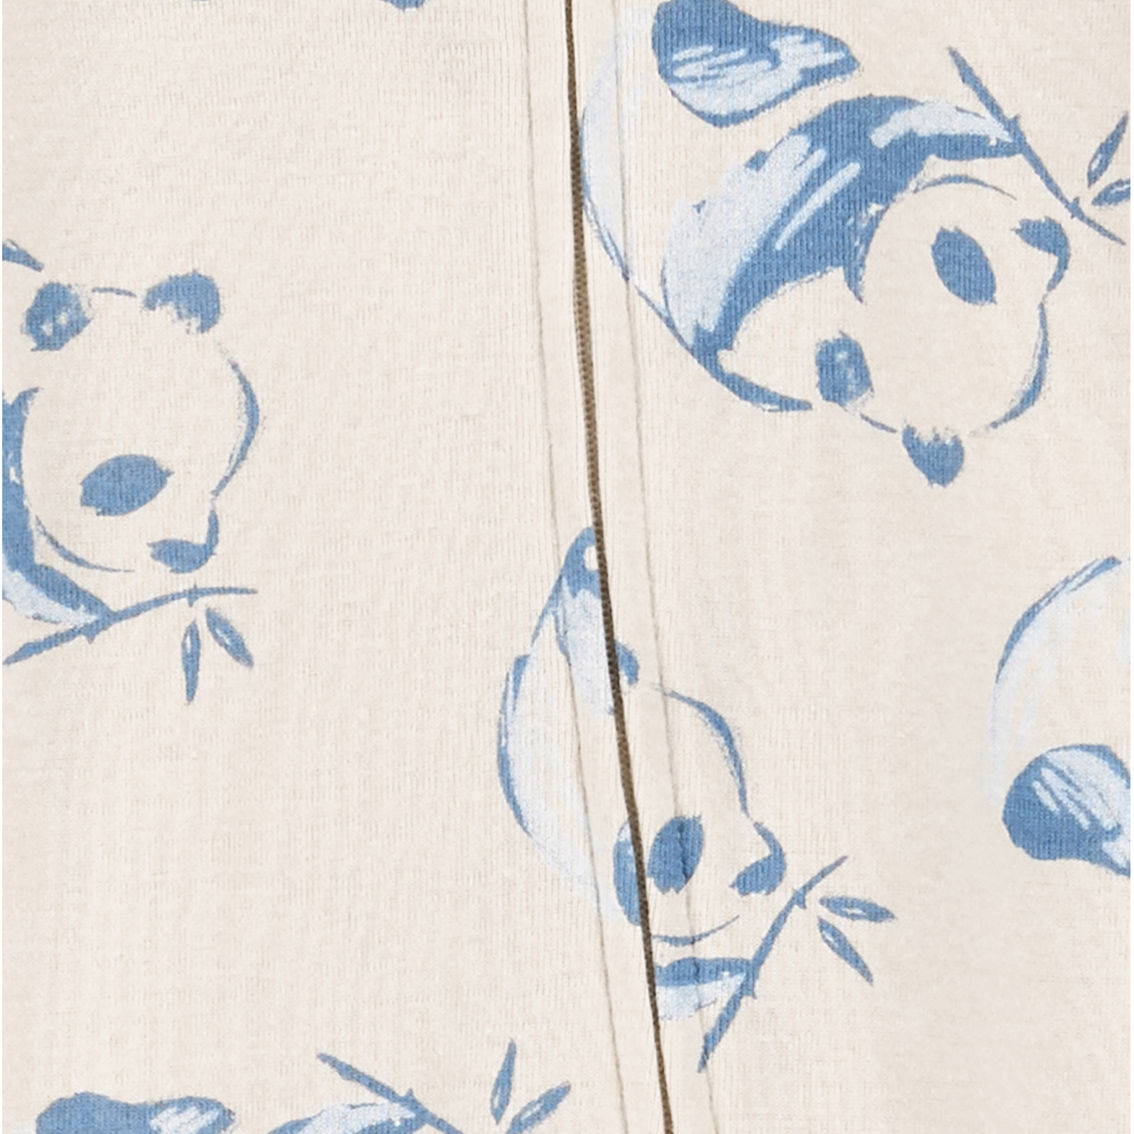 Carter's Infant Boys Panda Sleep and Play and Cap Set 2 pc. - Image 2 of 2